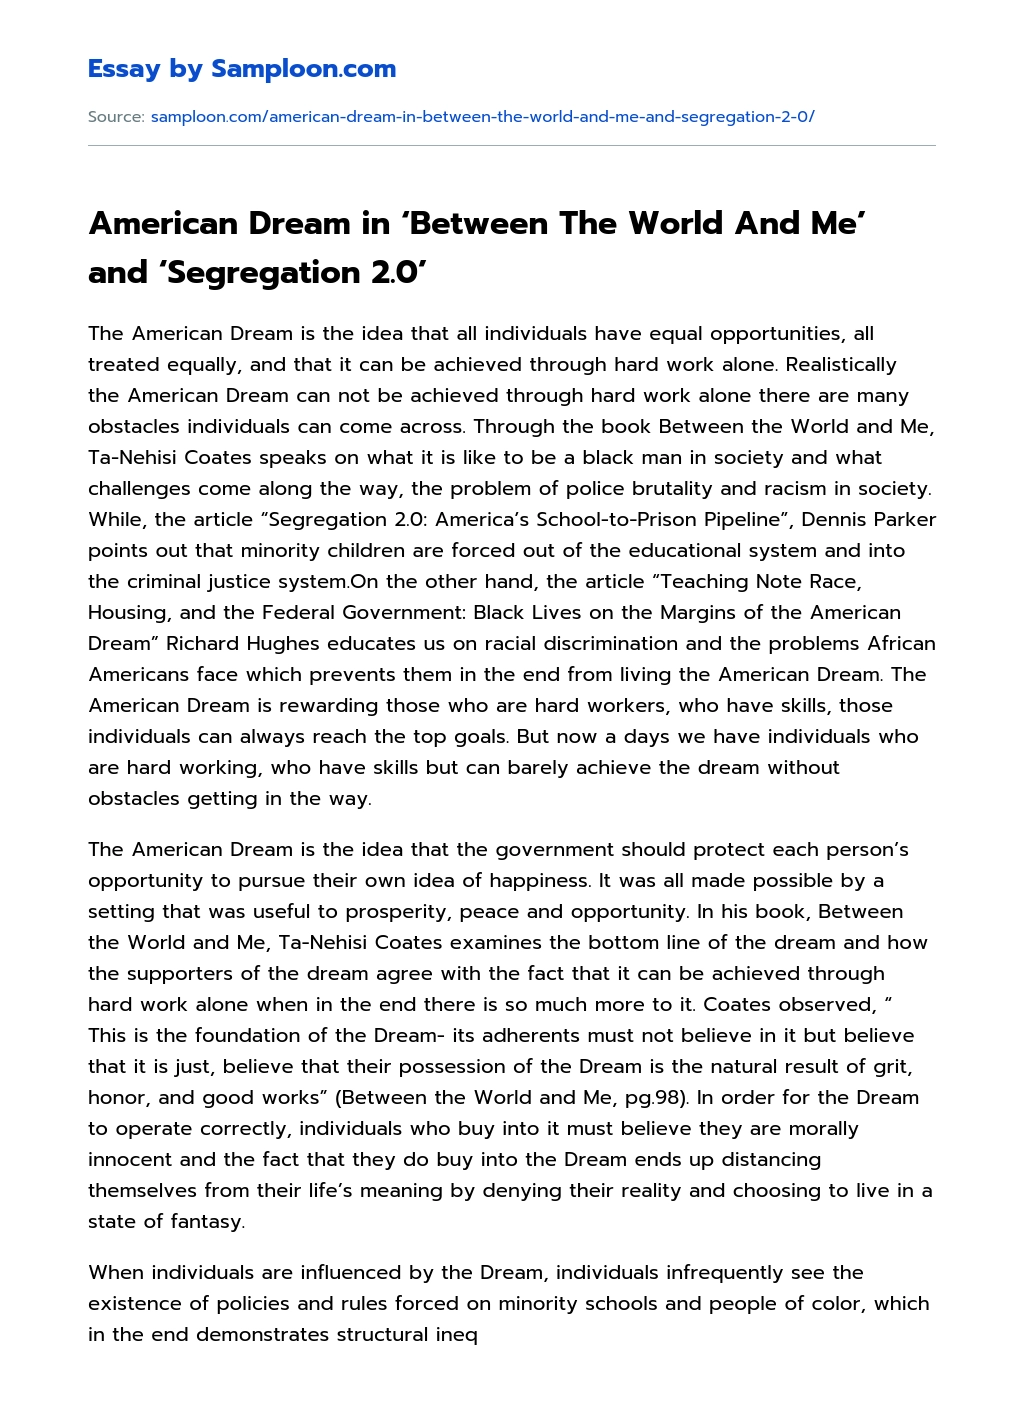 American Dream in ‘Between The World And Me’ and ‘Segregation 2.0’ essay